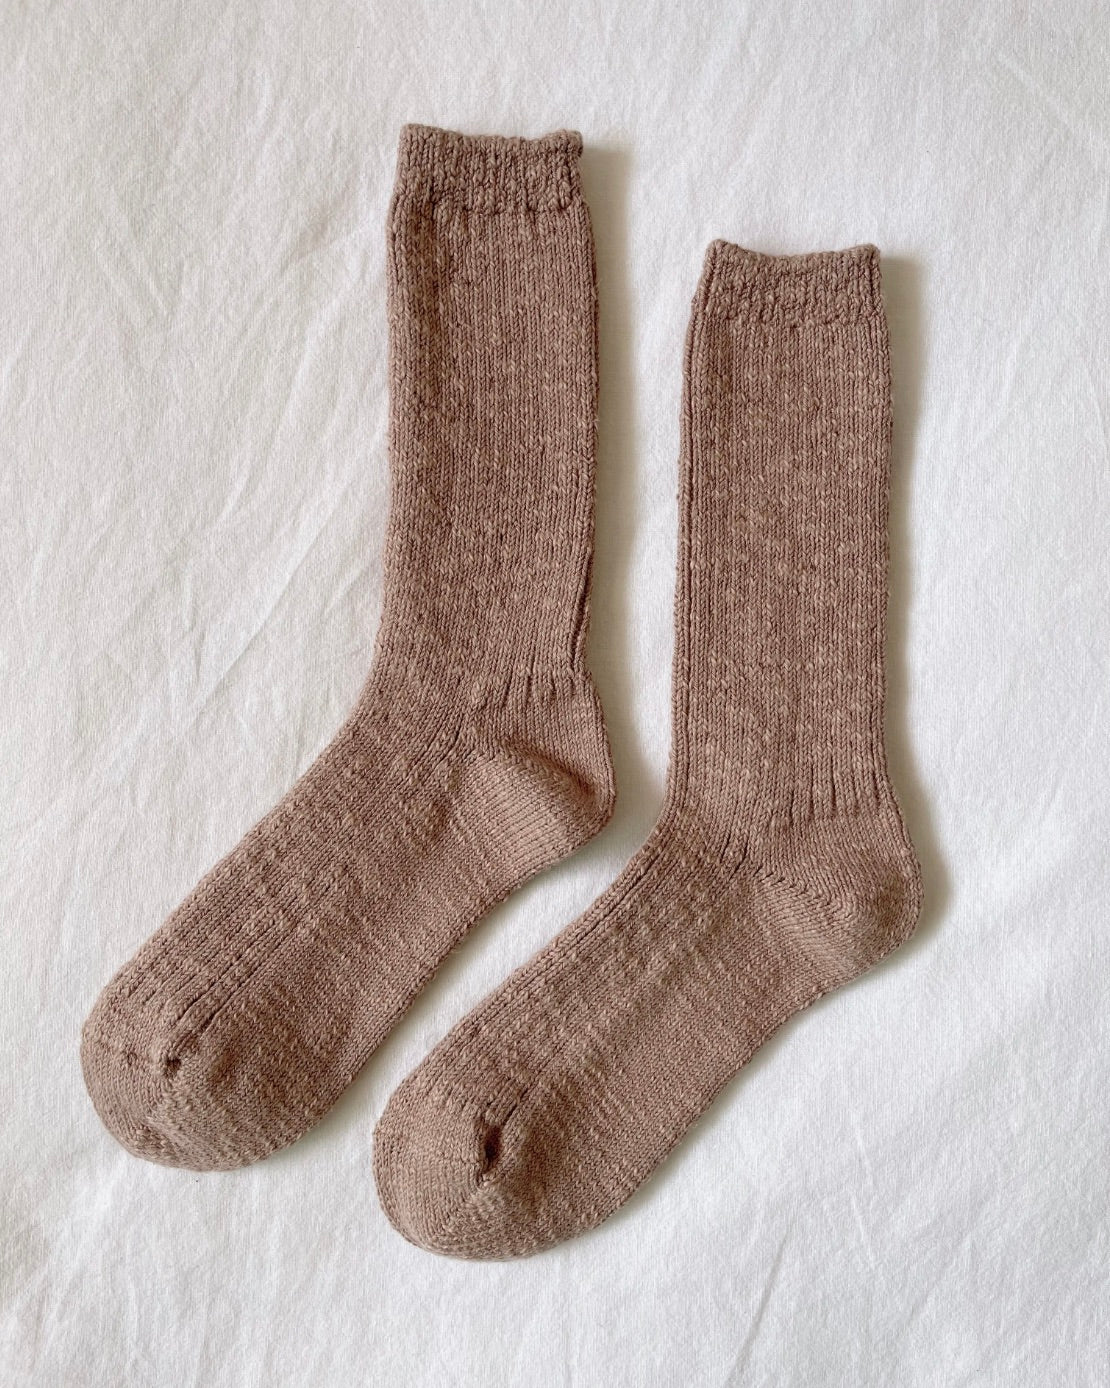 Le Bon Shoppe Cottage Socks in Toffee on a white background